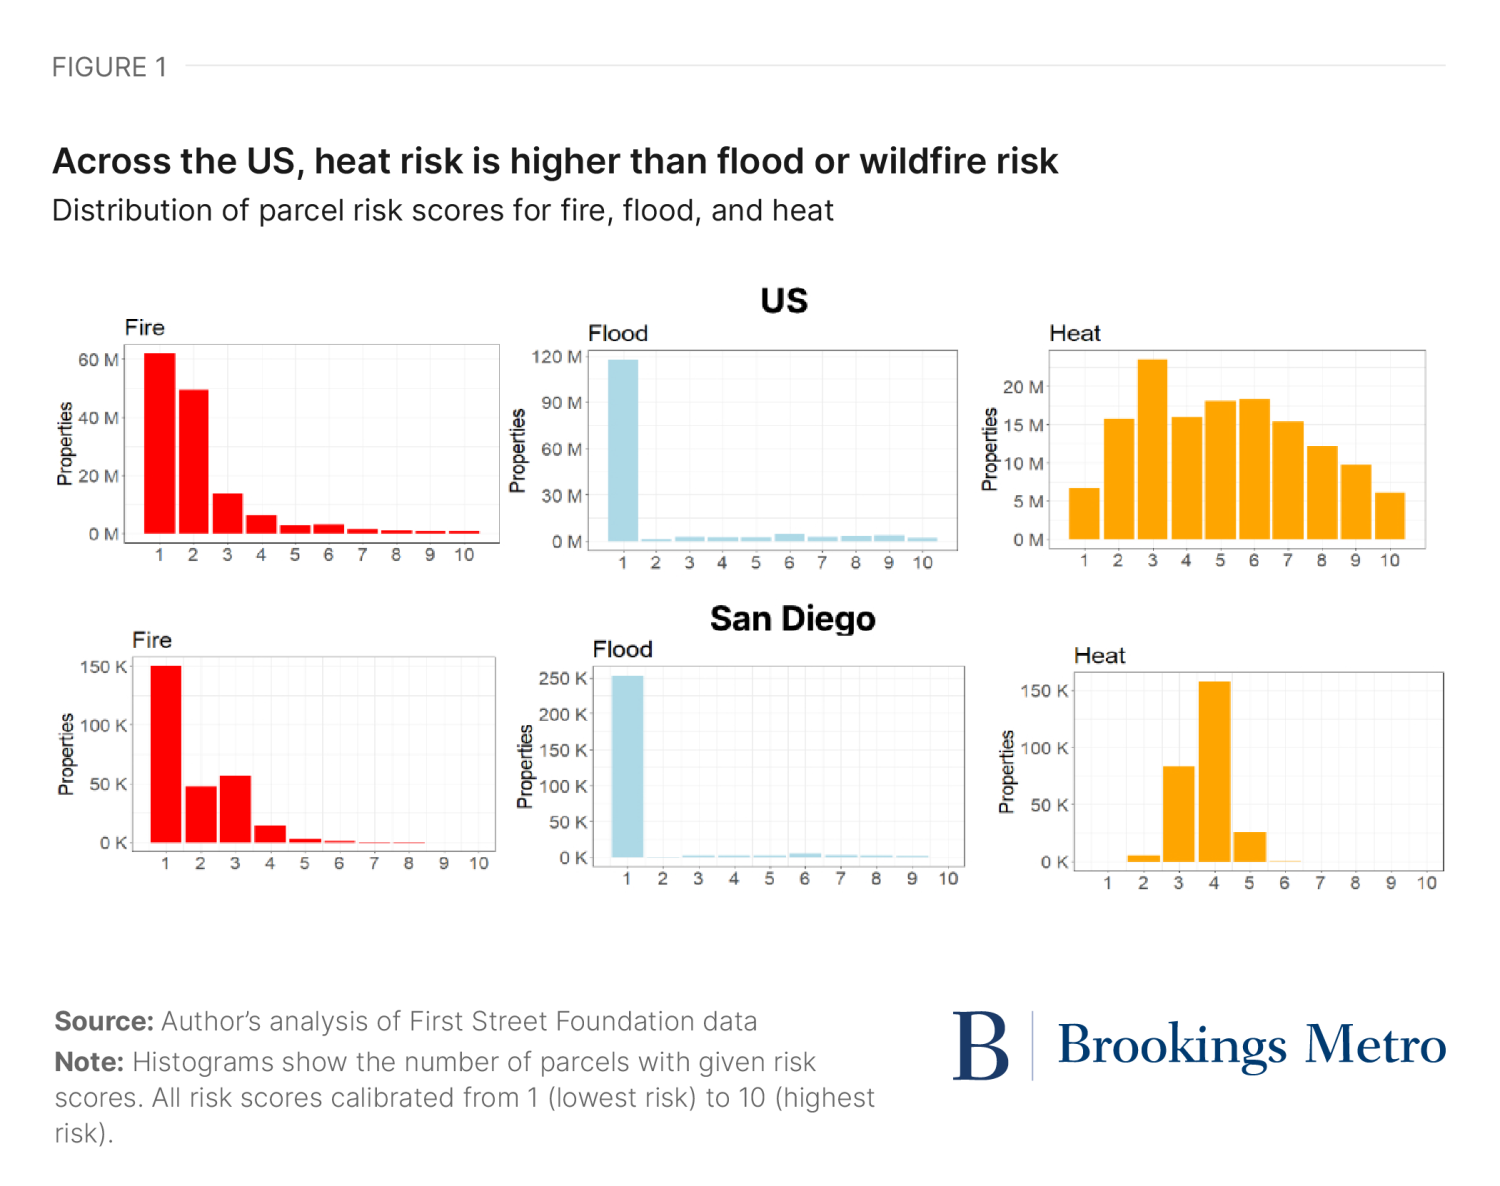 Figure 1. Across the US, heat risk is higher than flood or wildfire risk